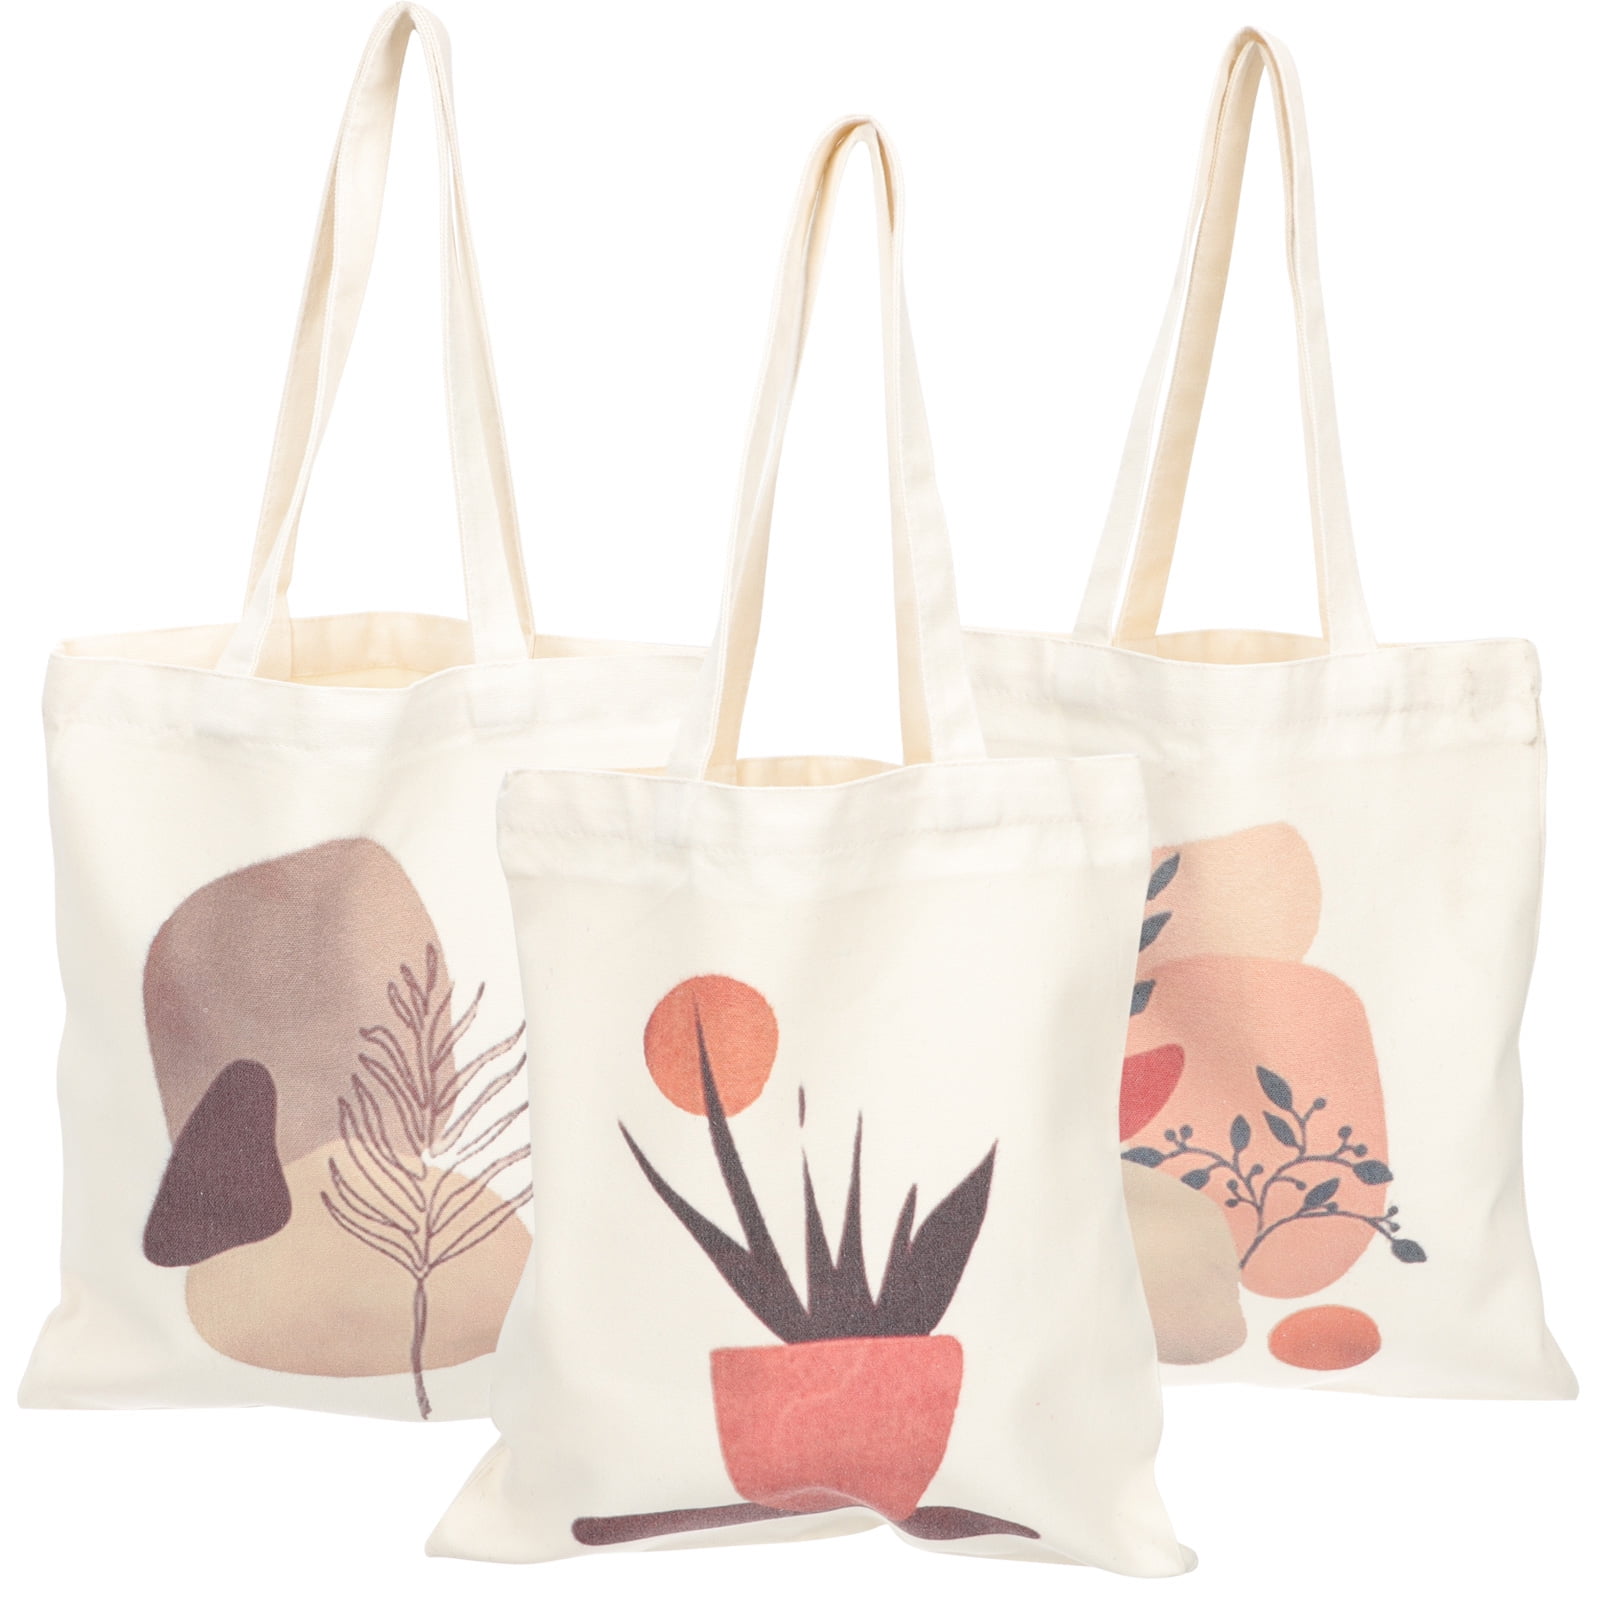 Kitchen Reusable Grocery Bags3pcs Canvas Tote Bags Large Shoulder Bags  Fashion Shopping Bags for Women Students